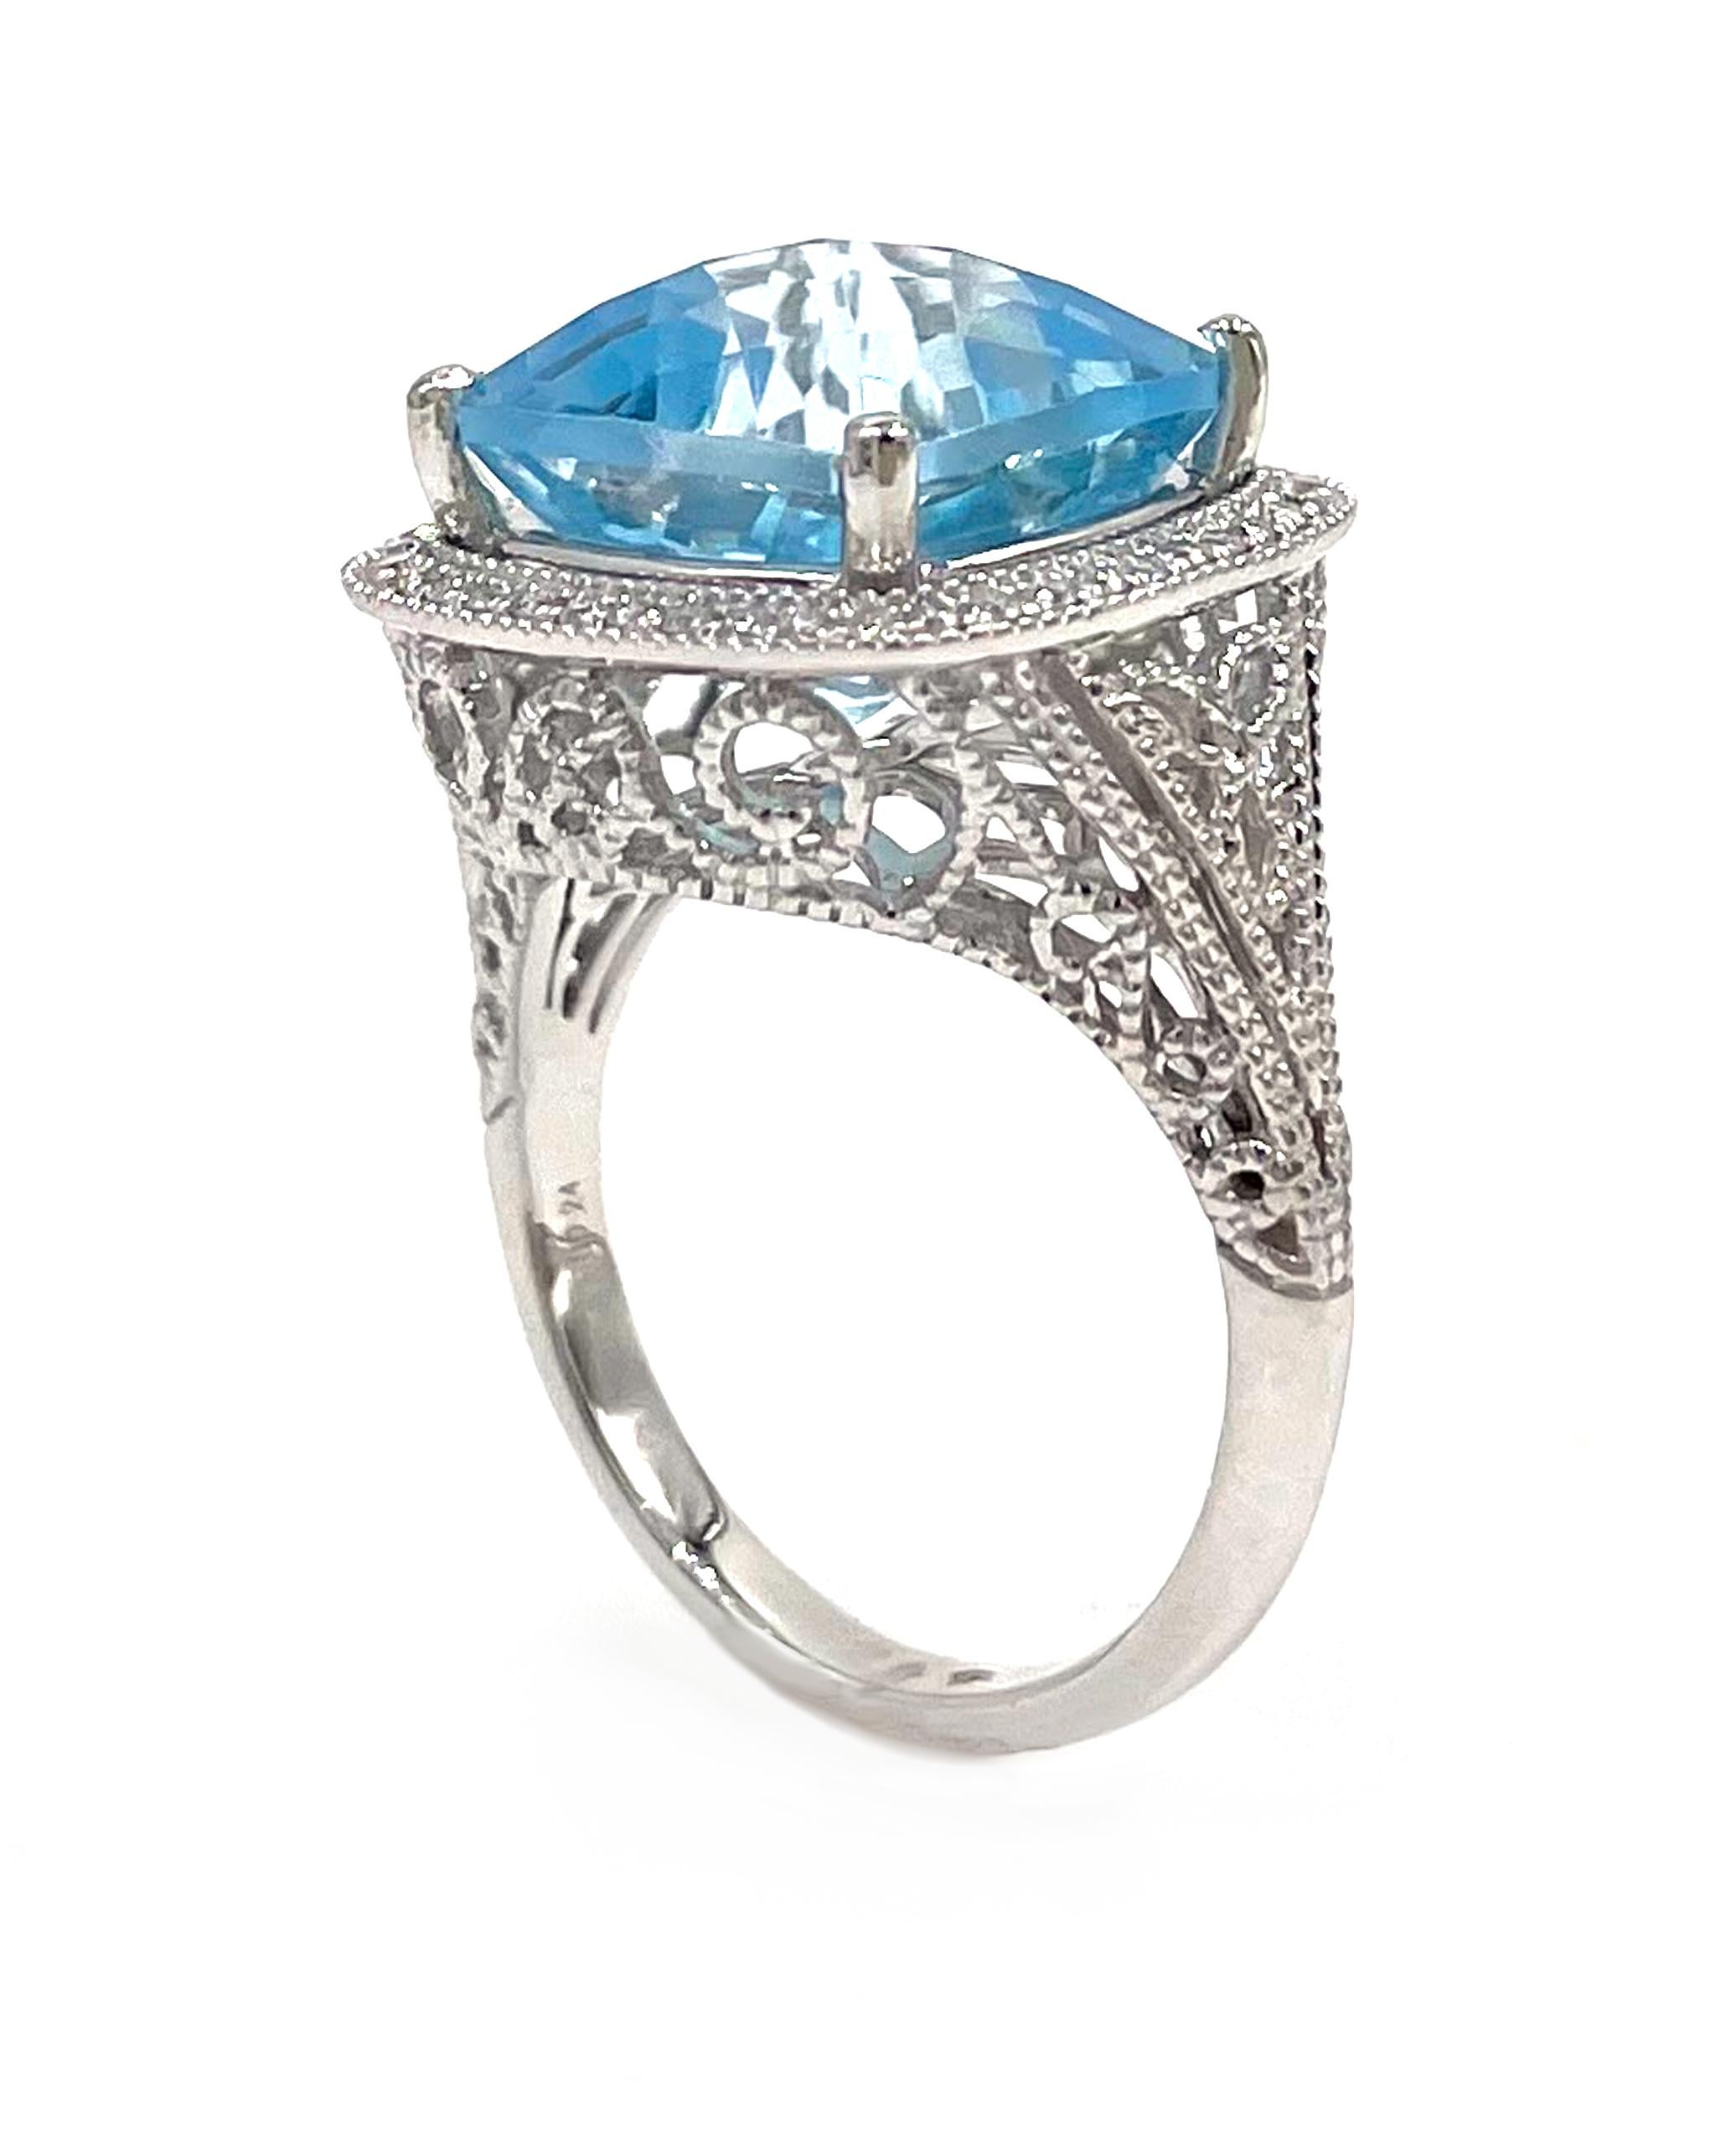 Cushion Cut 14K White Gold Right Hand Filigree Ring with Blue Topaz and Diamonds